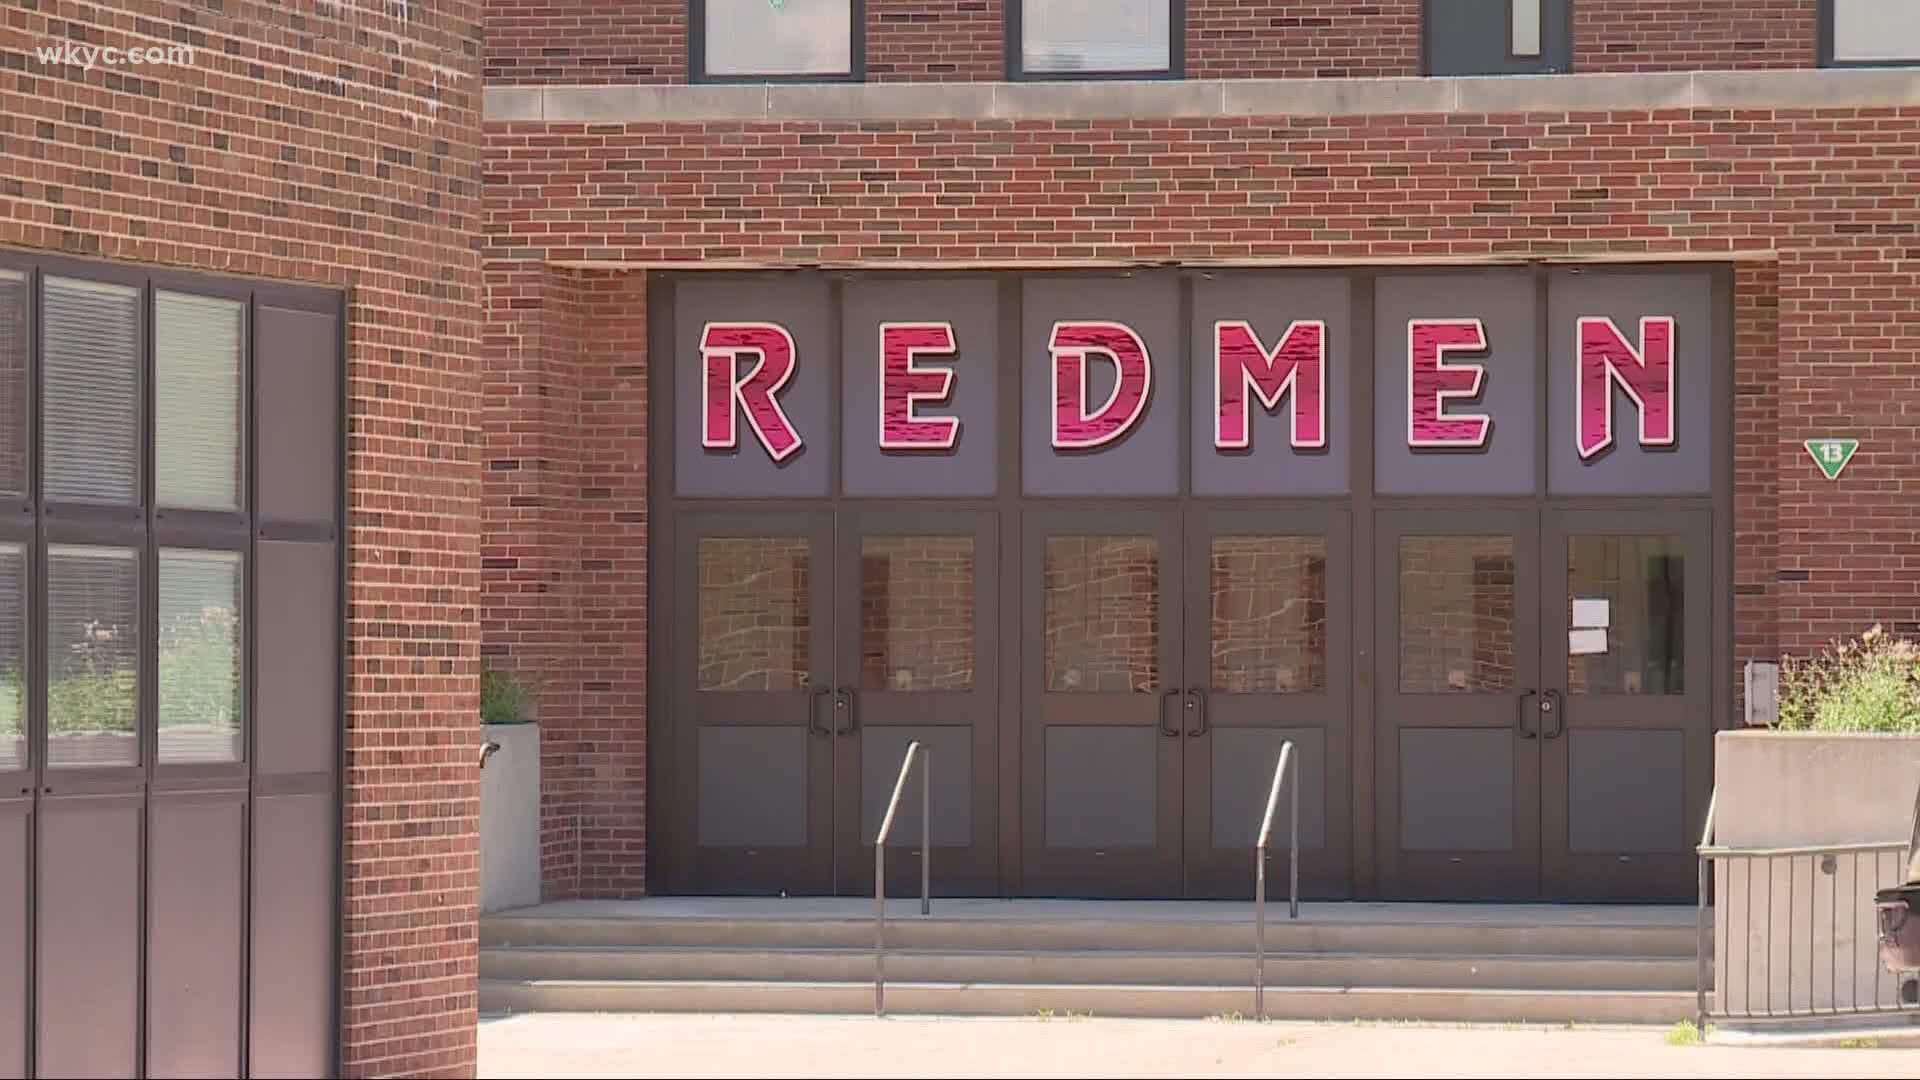 In 1936 the school went from the “Greyhounds” to “Redmen” to reflect “nobility, loyalty and courage.” Lynna Lai reports.